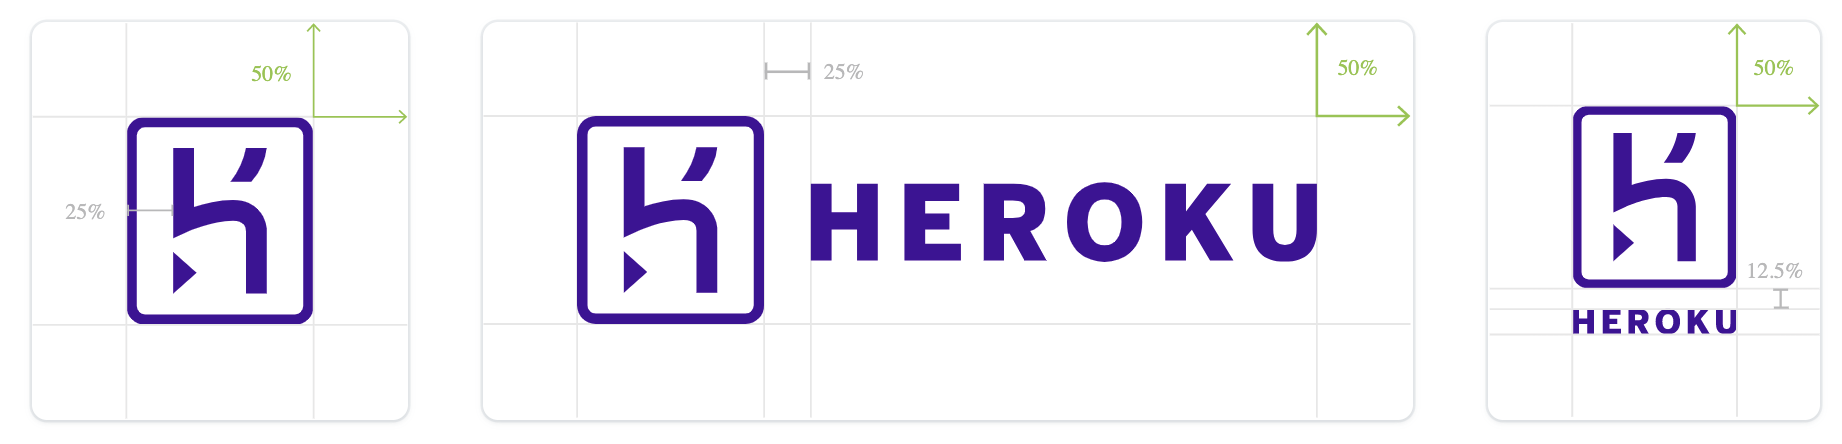 Dimensions for the Heroku logo, vertical logotype and horizontal logotype, from left to right